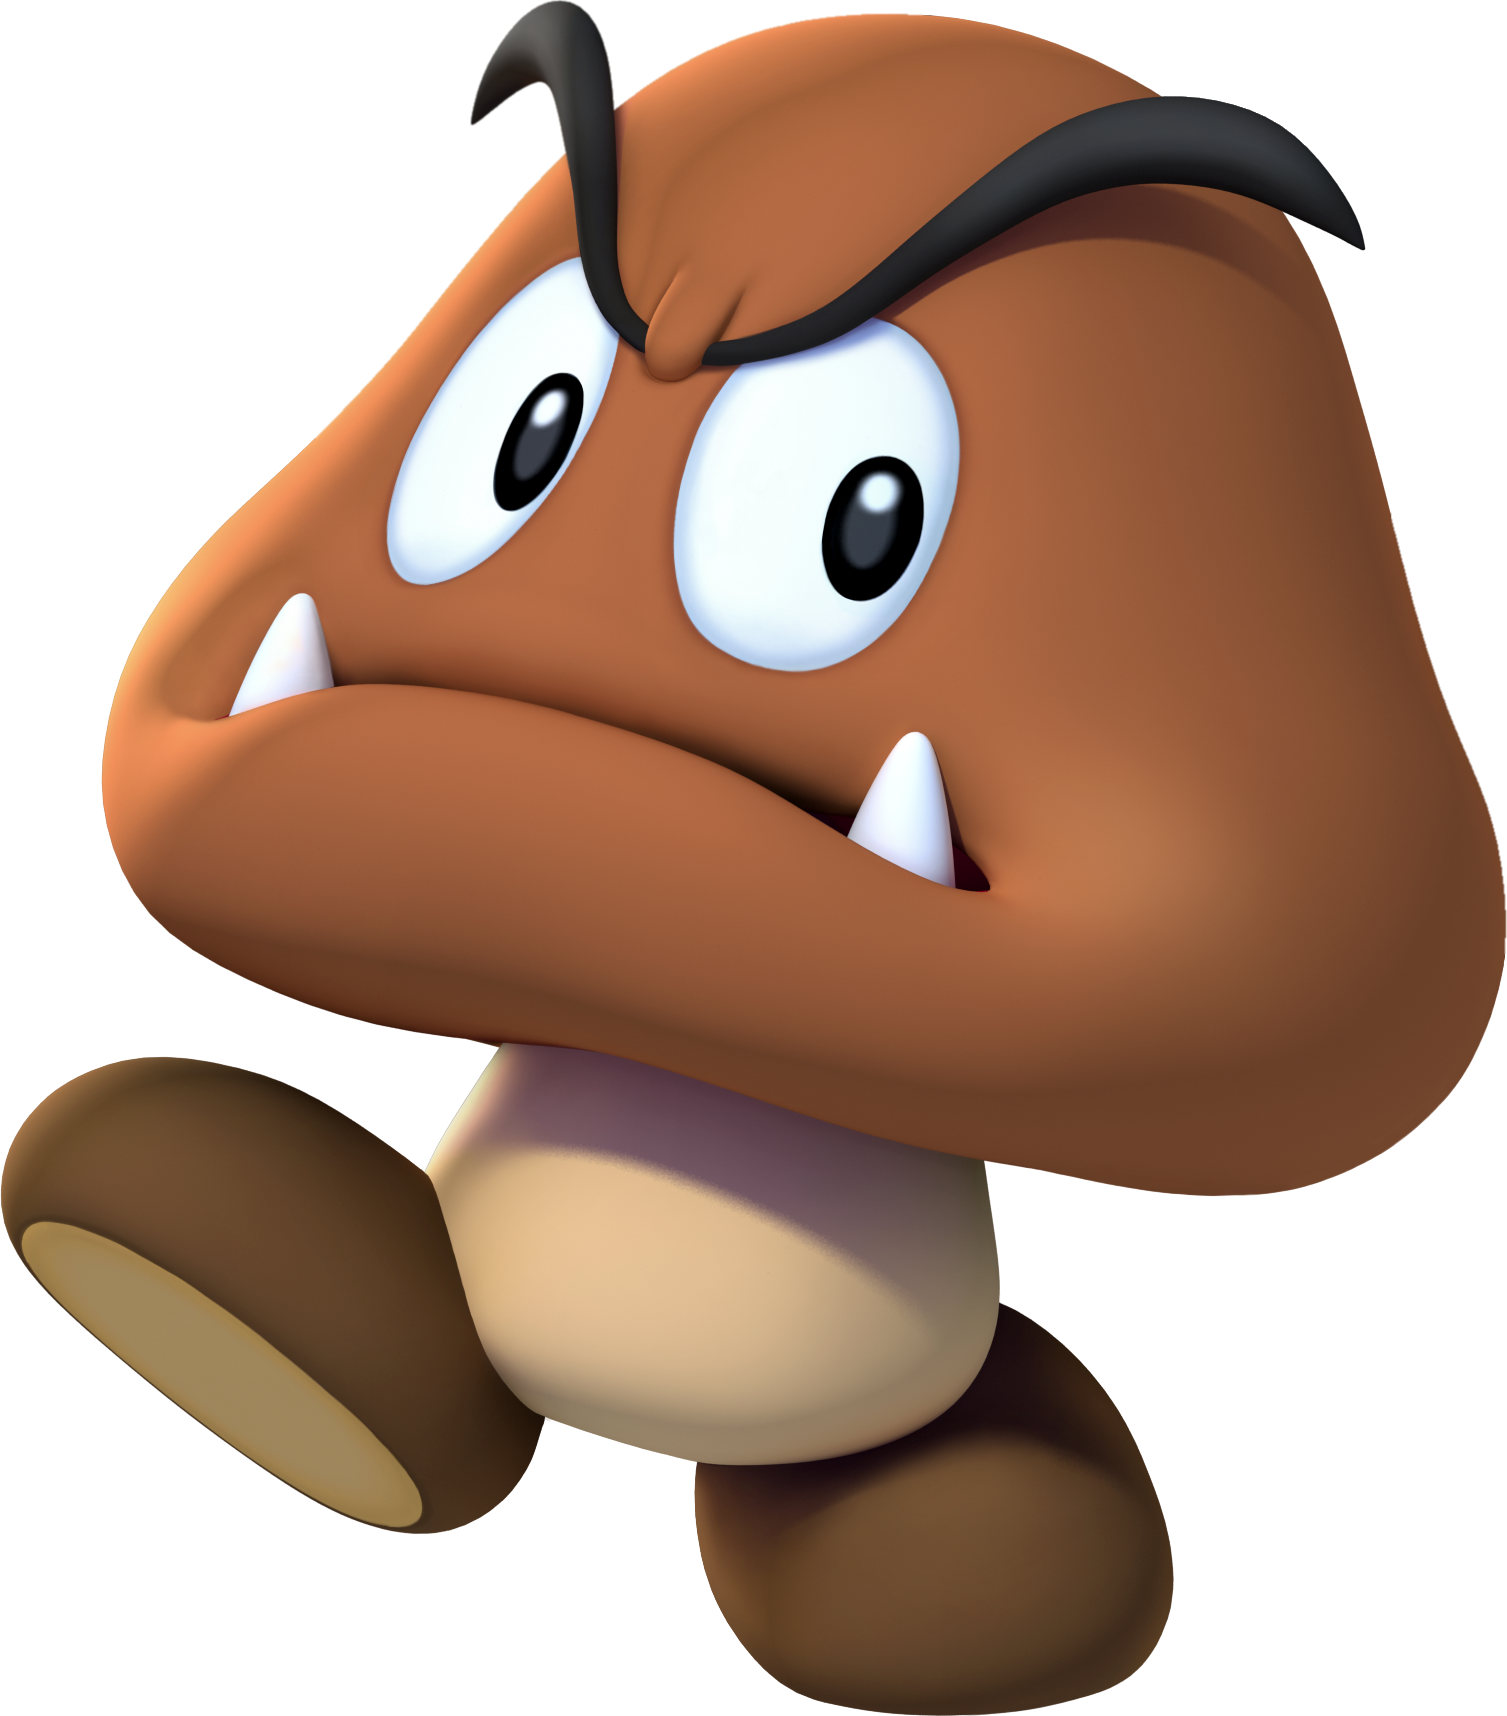 Goomba New Mario Goomba Transparent Background 1507x1716 Png Clipart Download